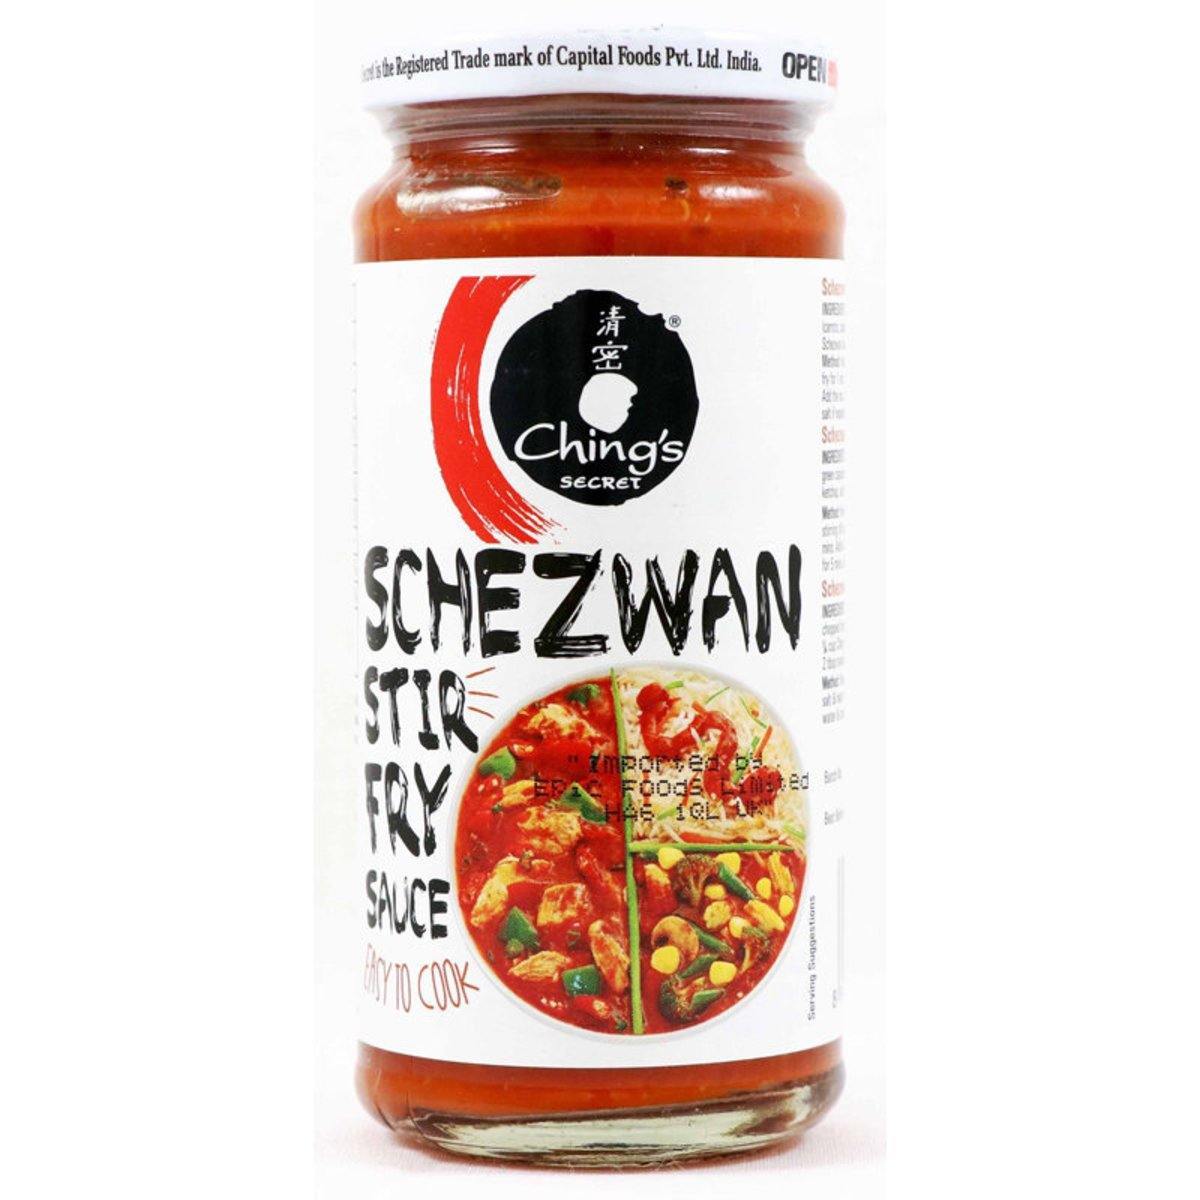 Ching&#39;s Schezwan Sauce (Stir Fry) 250g - Cartly - Indian Grocery Store